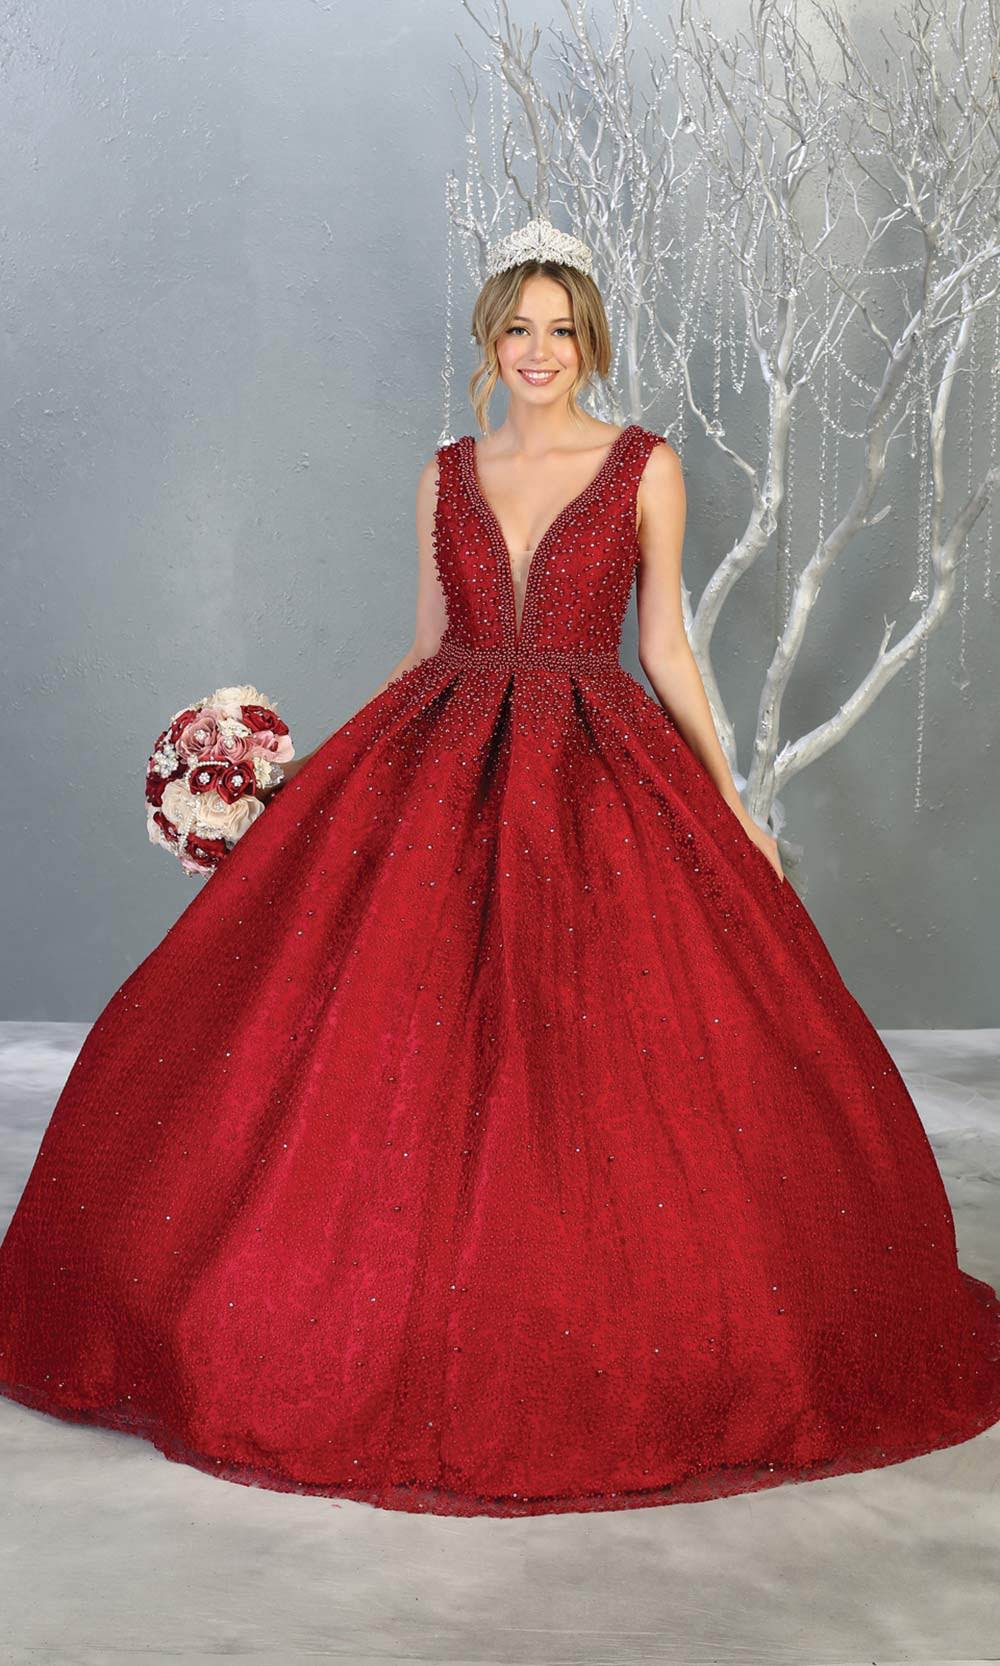 Mayqueen LK112 burgundy red quinceanera ball gown w/ wide straps & pearls. This dark red ball gown is perfect for engagement dress, wedding reception, indowestern party gown, sweet 16, debut, sweet 15, sweet 18. Plus sizes available for red ballgowns.jpg